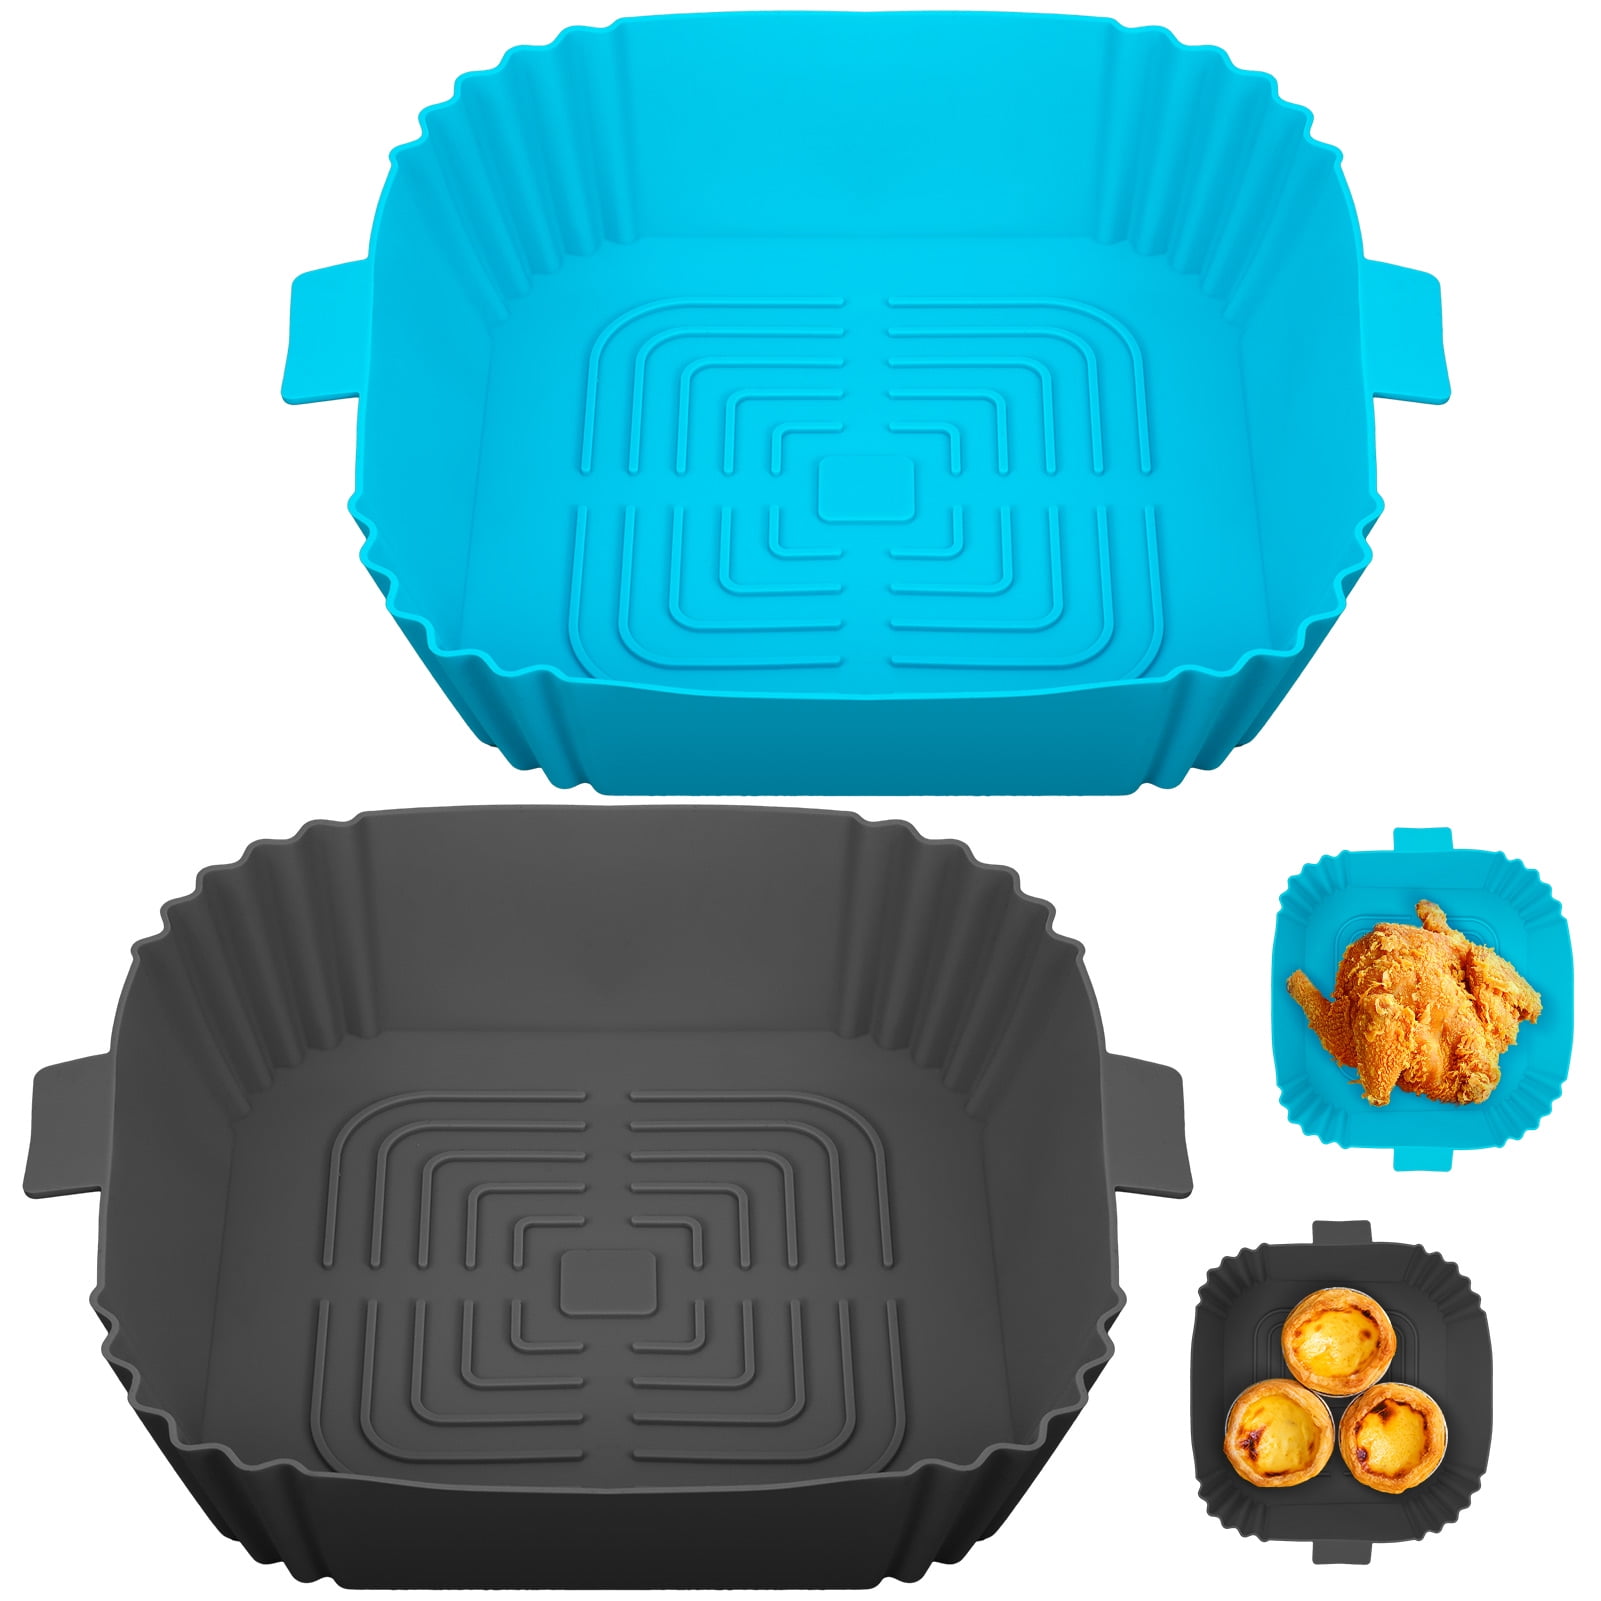 Zell Square Air Fryer Silicone Liners, 2 Pack 8.5 Inch Reusable